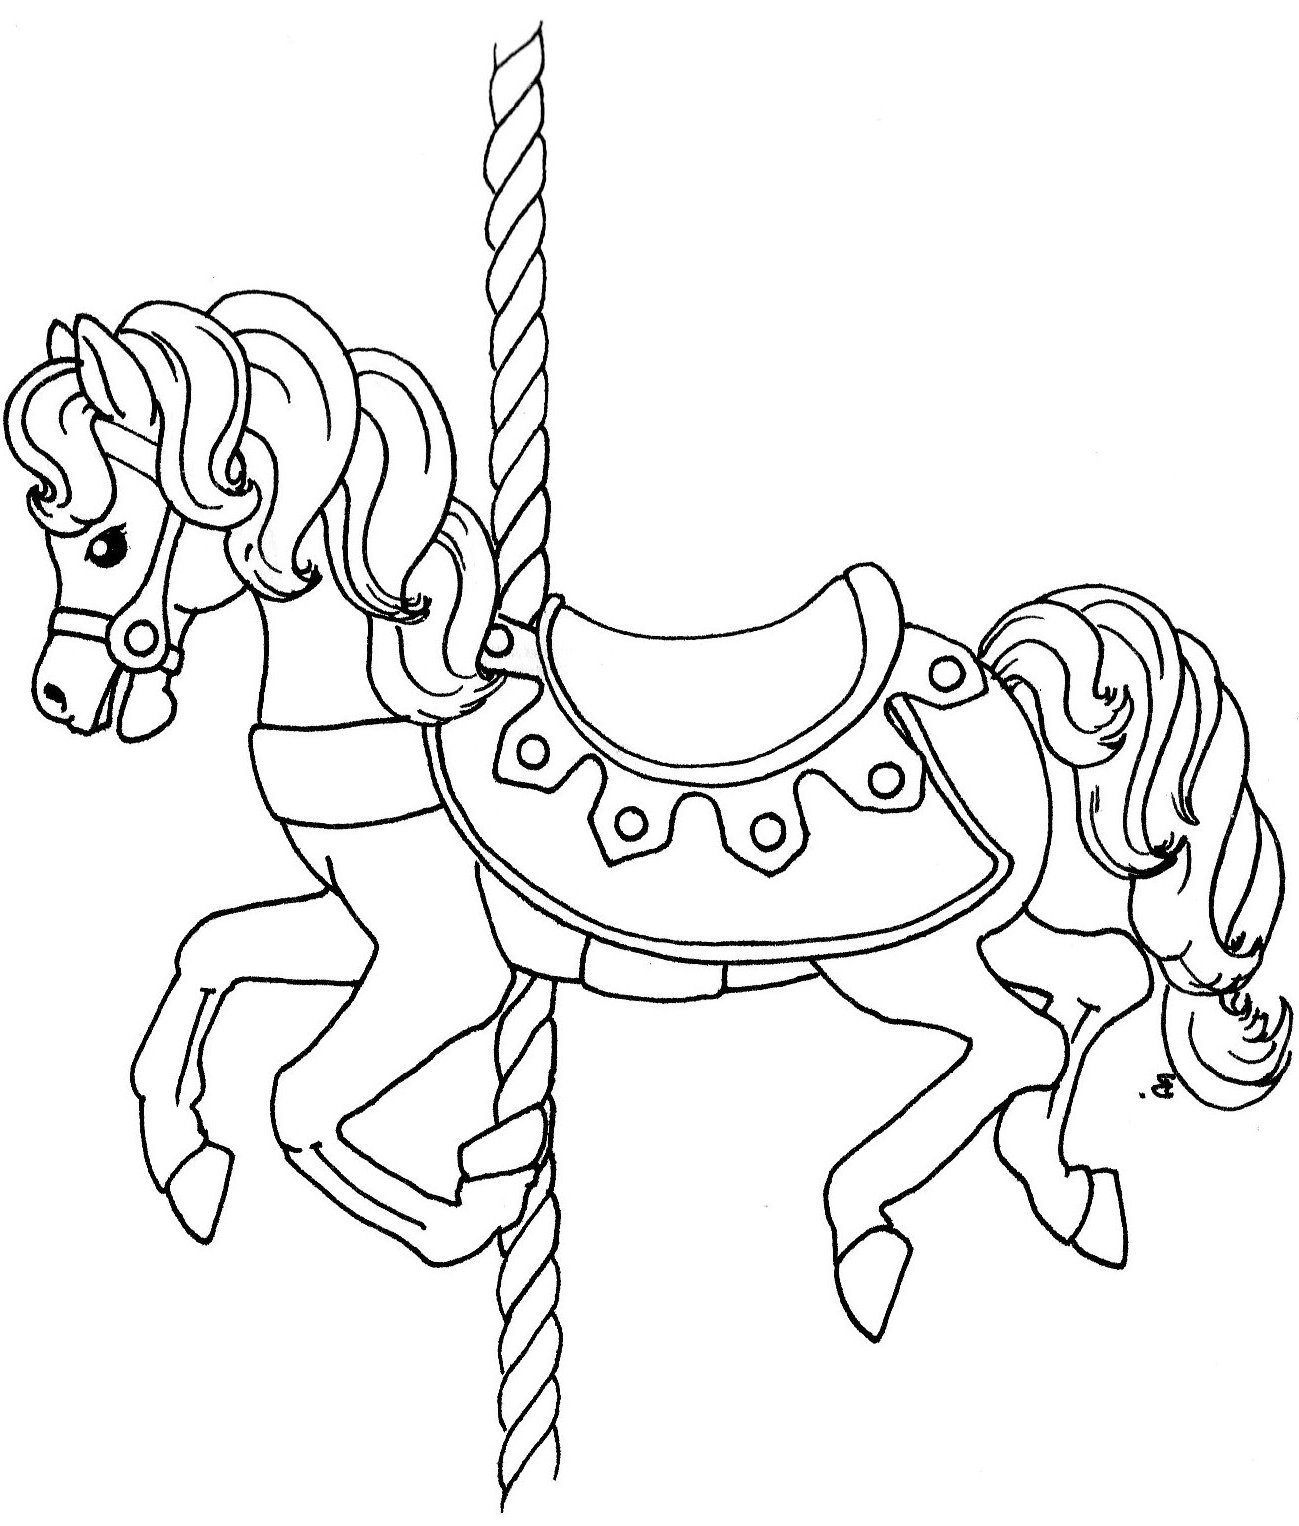 Carousel Coloring Pages at GetDrawings Free download